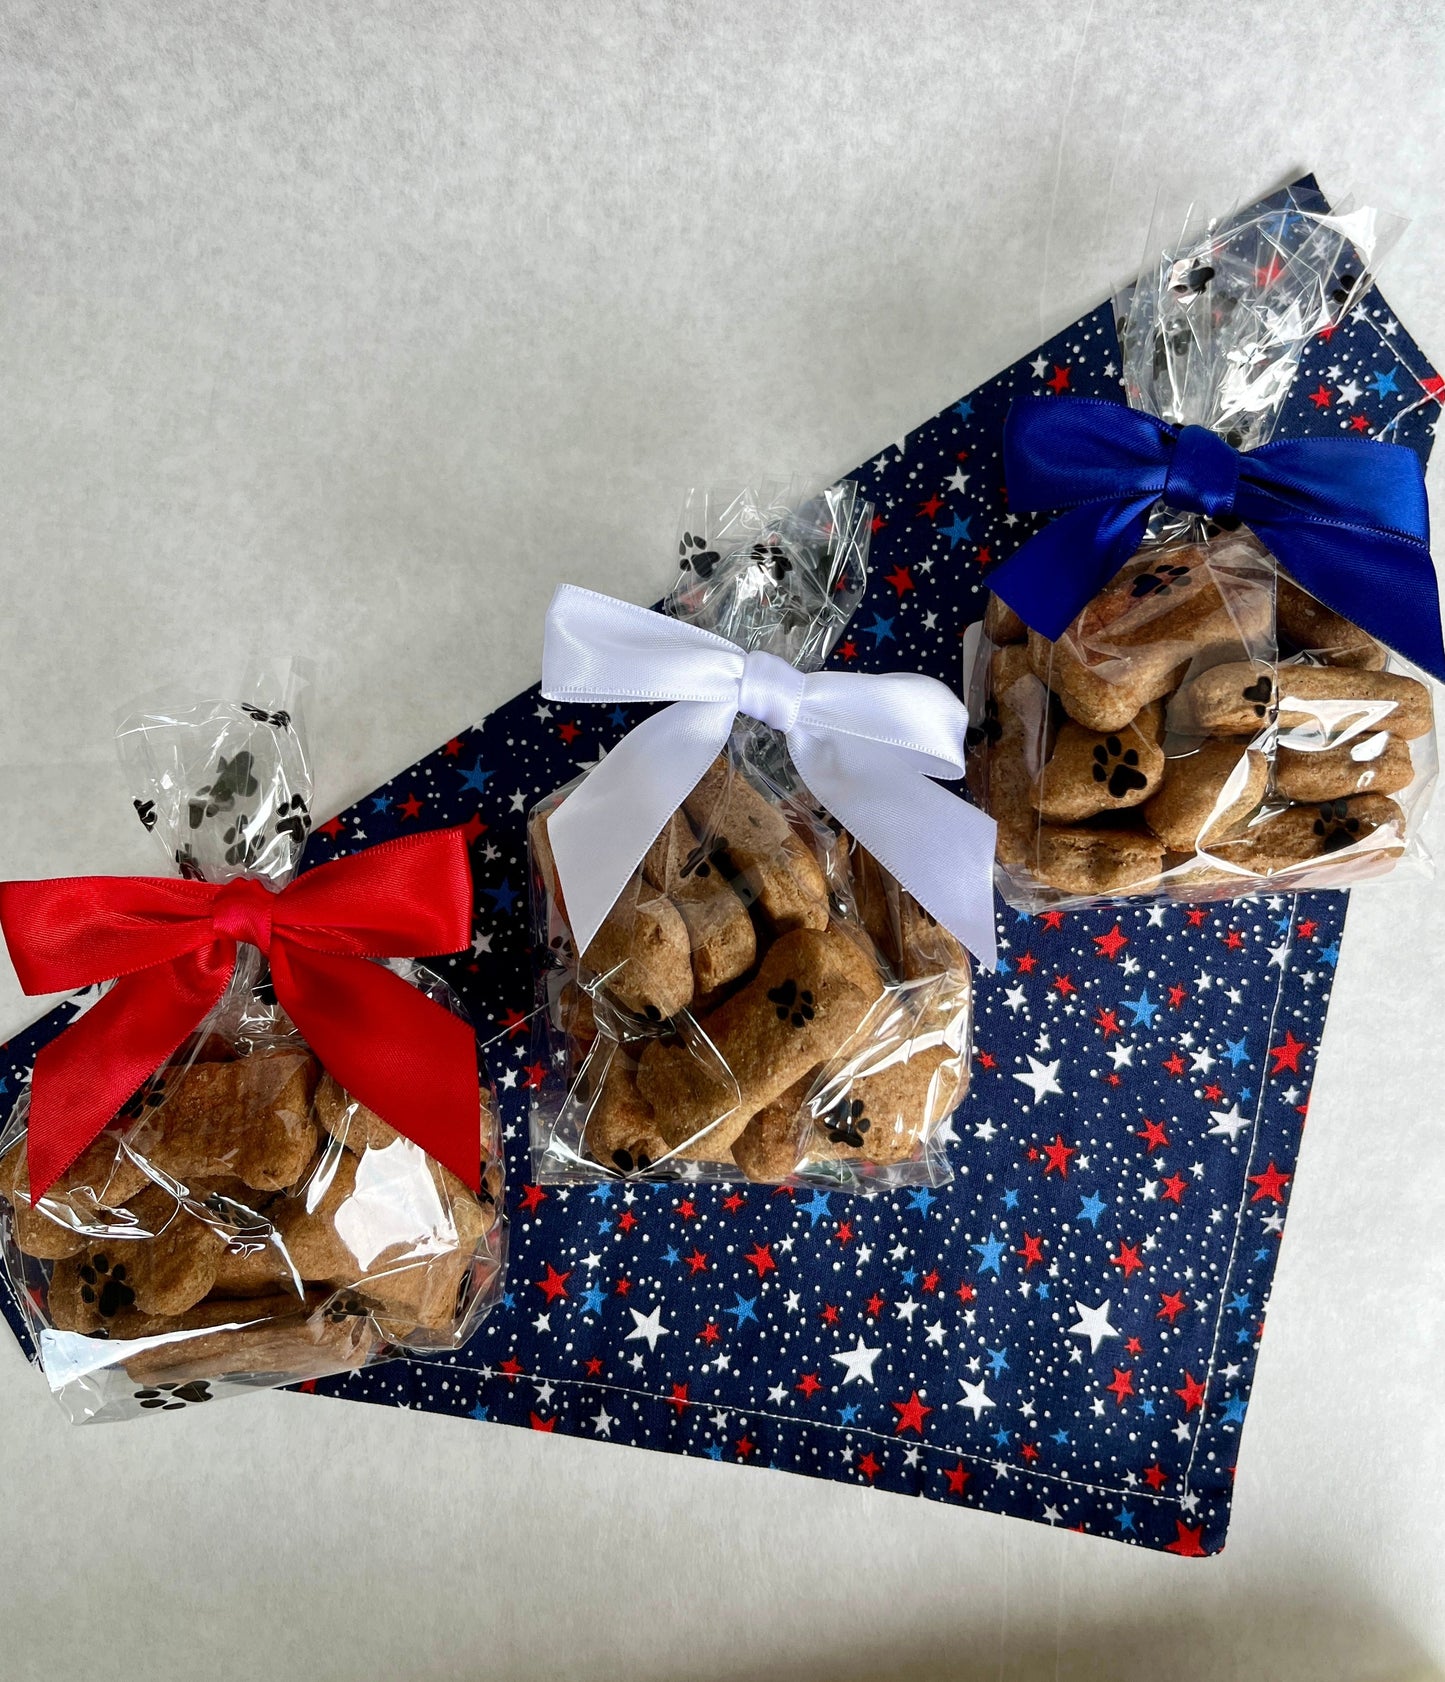 Sack of Treats - Baked Dog Biscuits with Applesauce & Peanut Butter